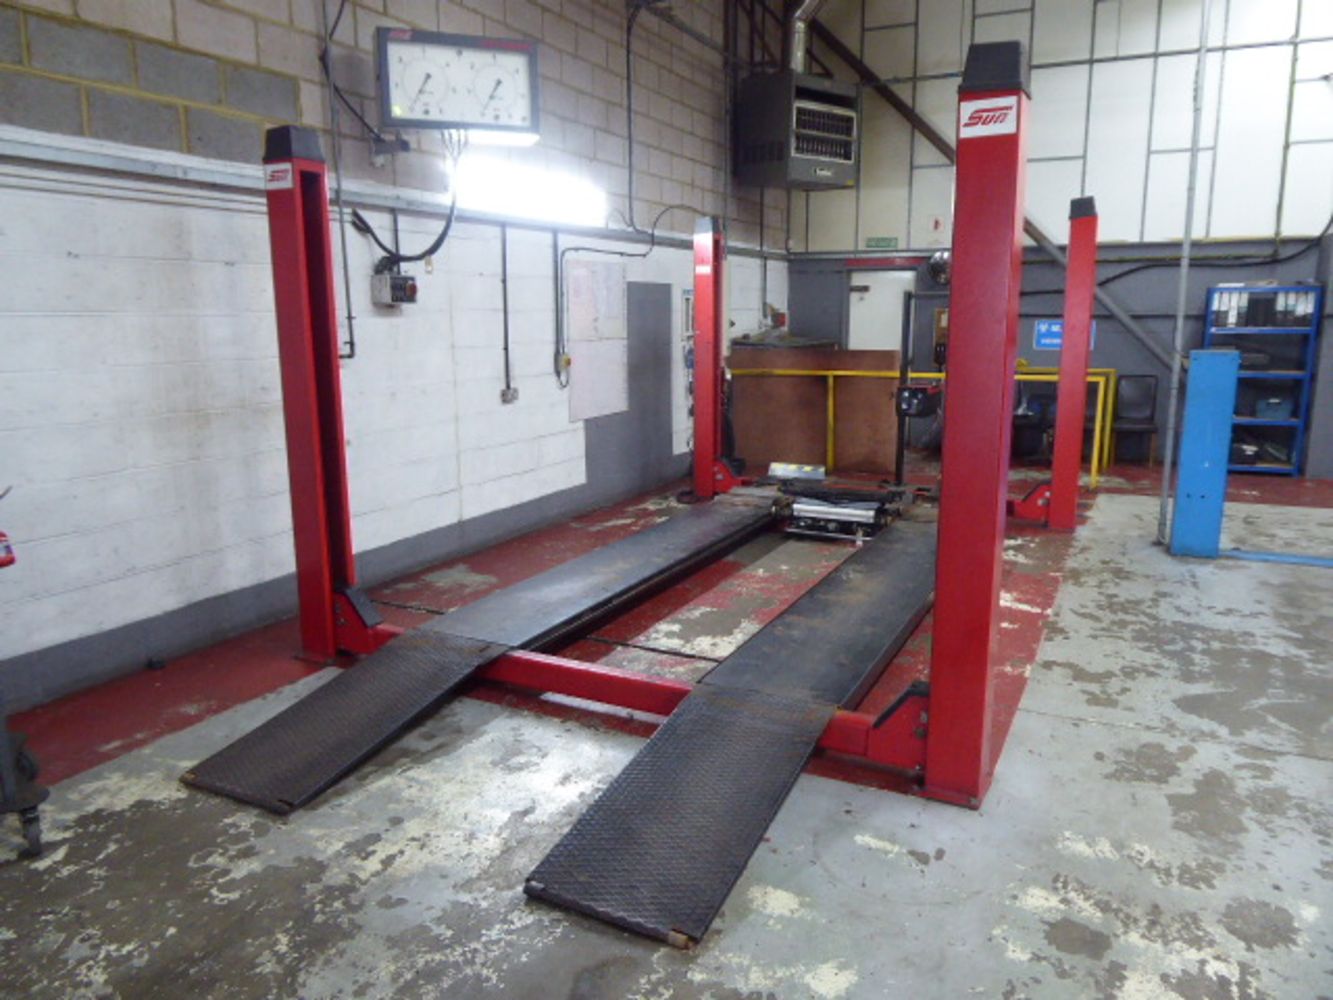 Garage Vehicle Lifts, Equipment and Tools